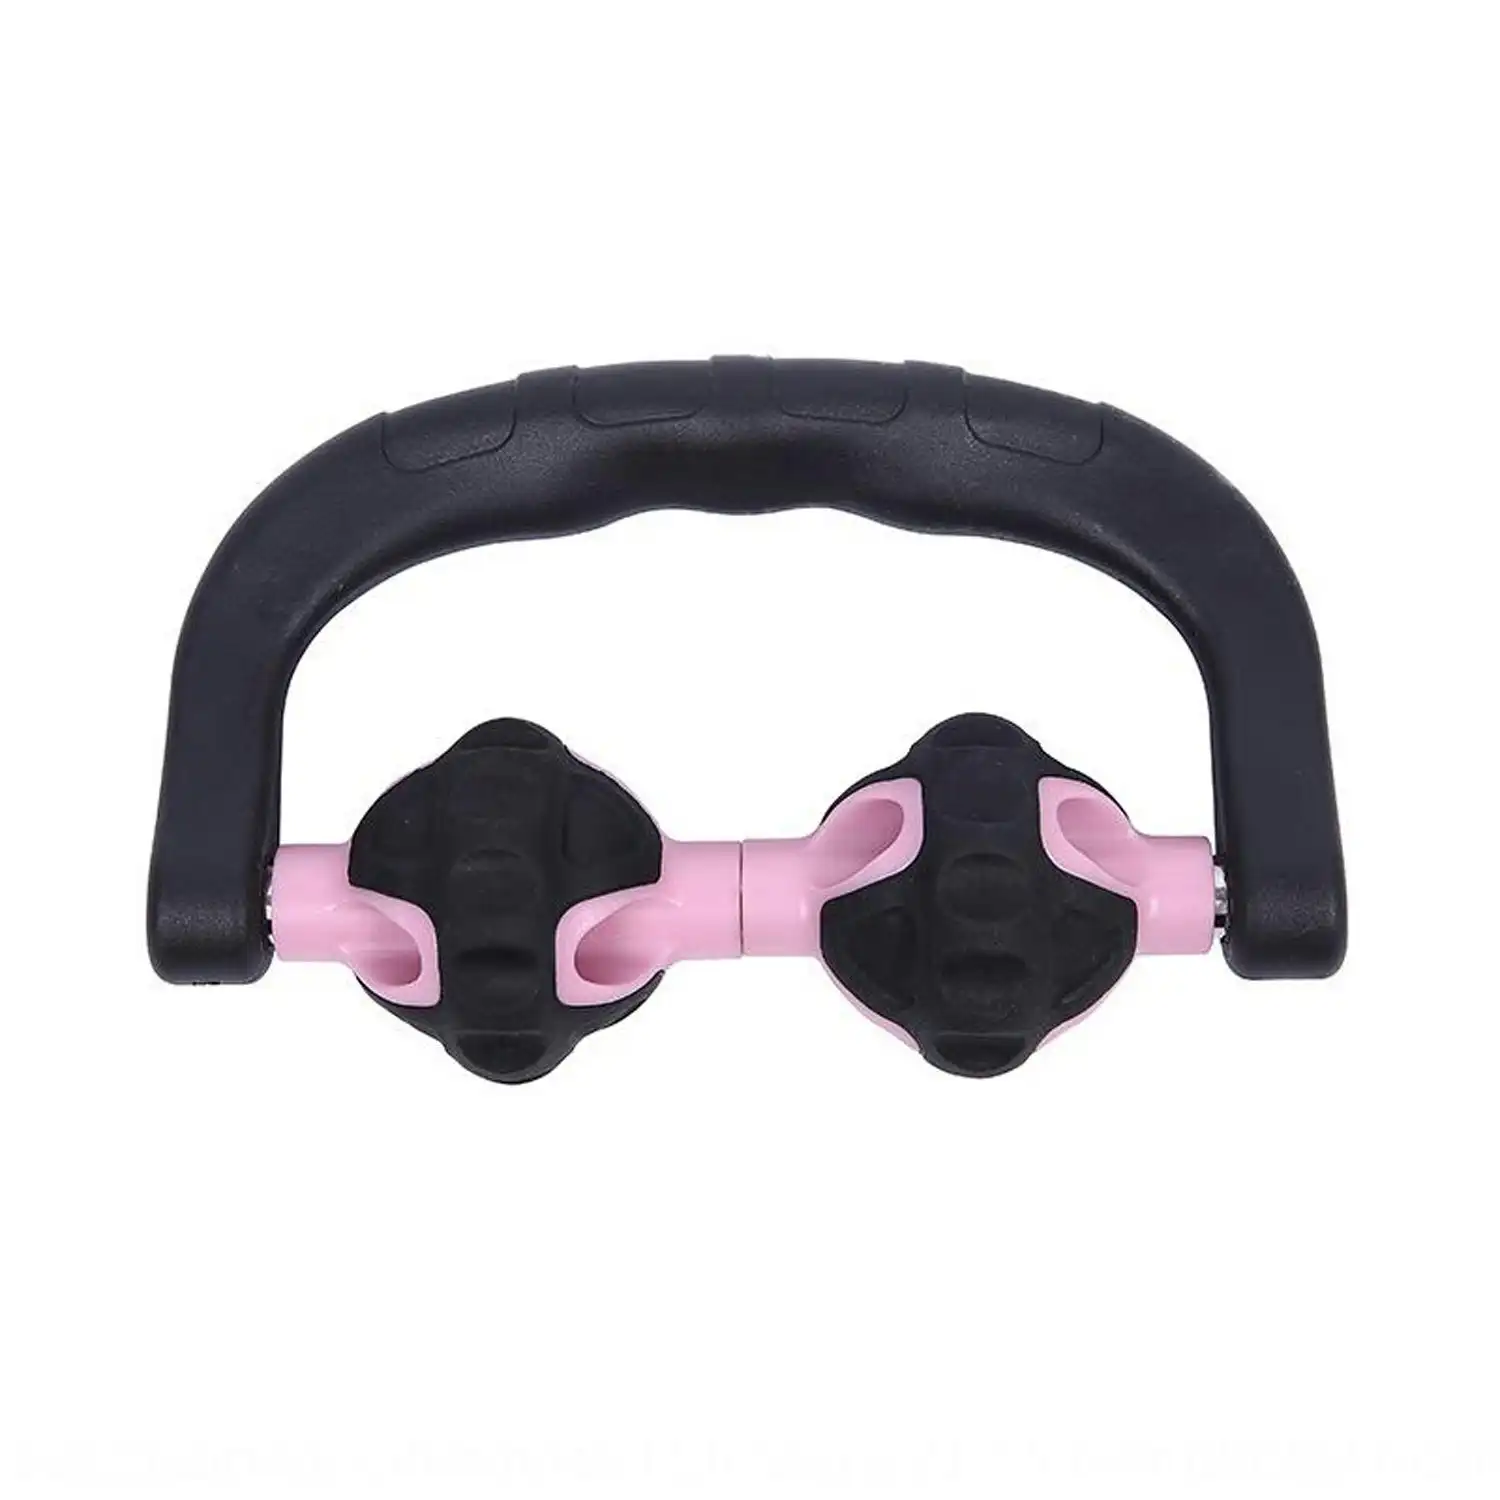 TODO Handheld Massage Muscle Roller Roll Massage Ball Tool Sore Tight Muscles - Pink